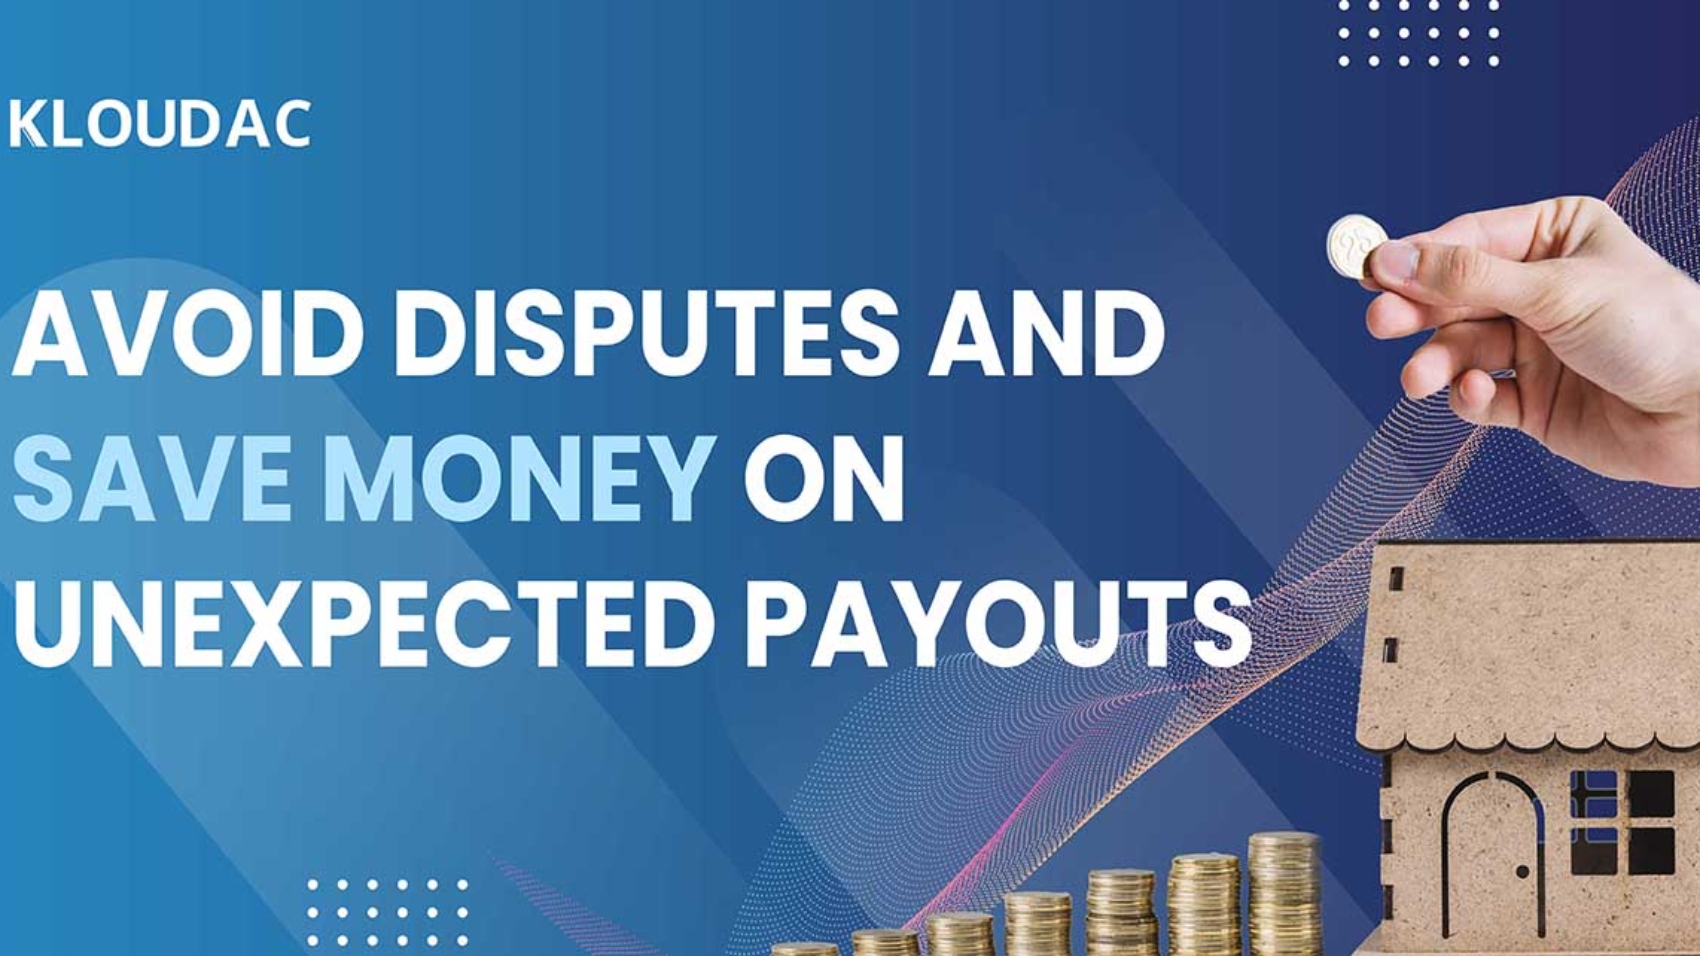 What can help you avoid disputes and save money on unexpected payouts